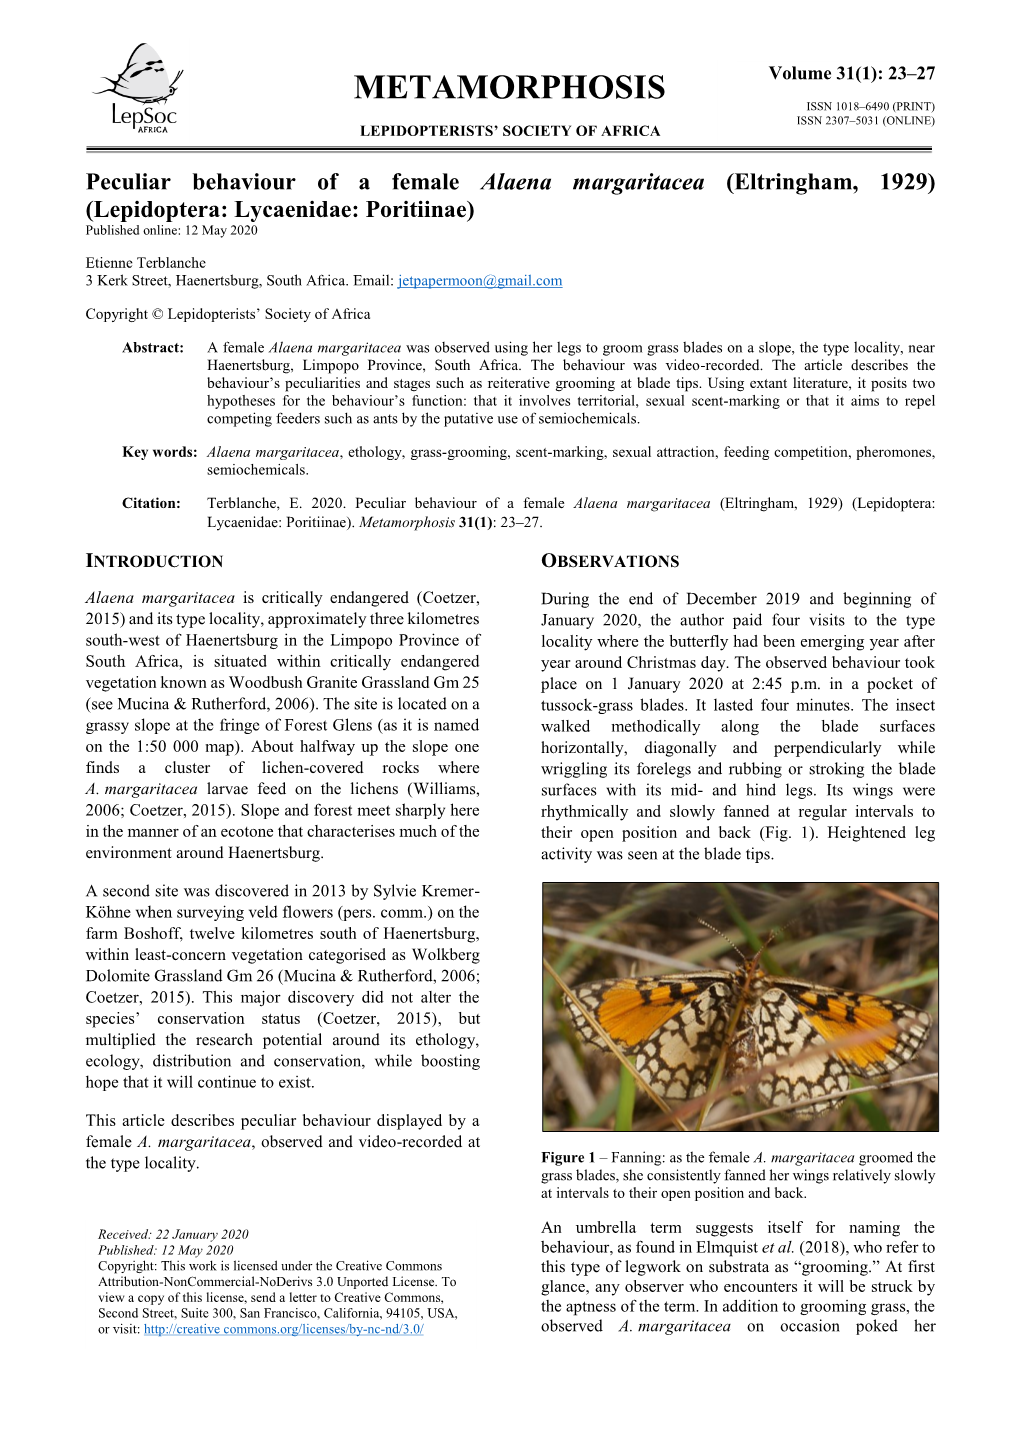 Metamorphosis Issn 1018–6490 (Print) Issn 2307–5031 (Online) Lepidopterists’ Society of Africa